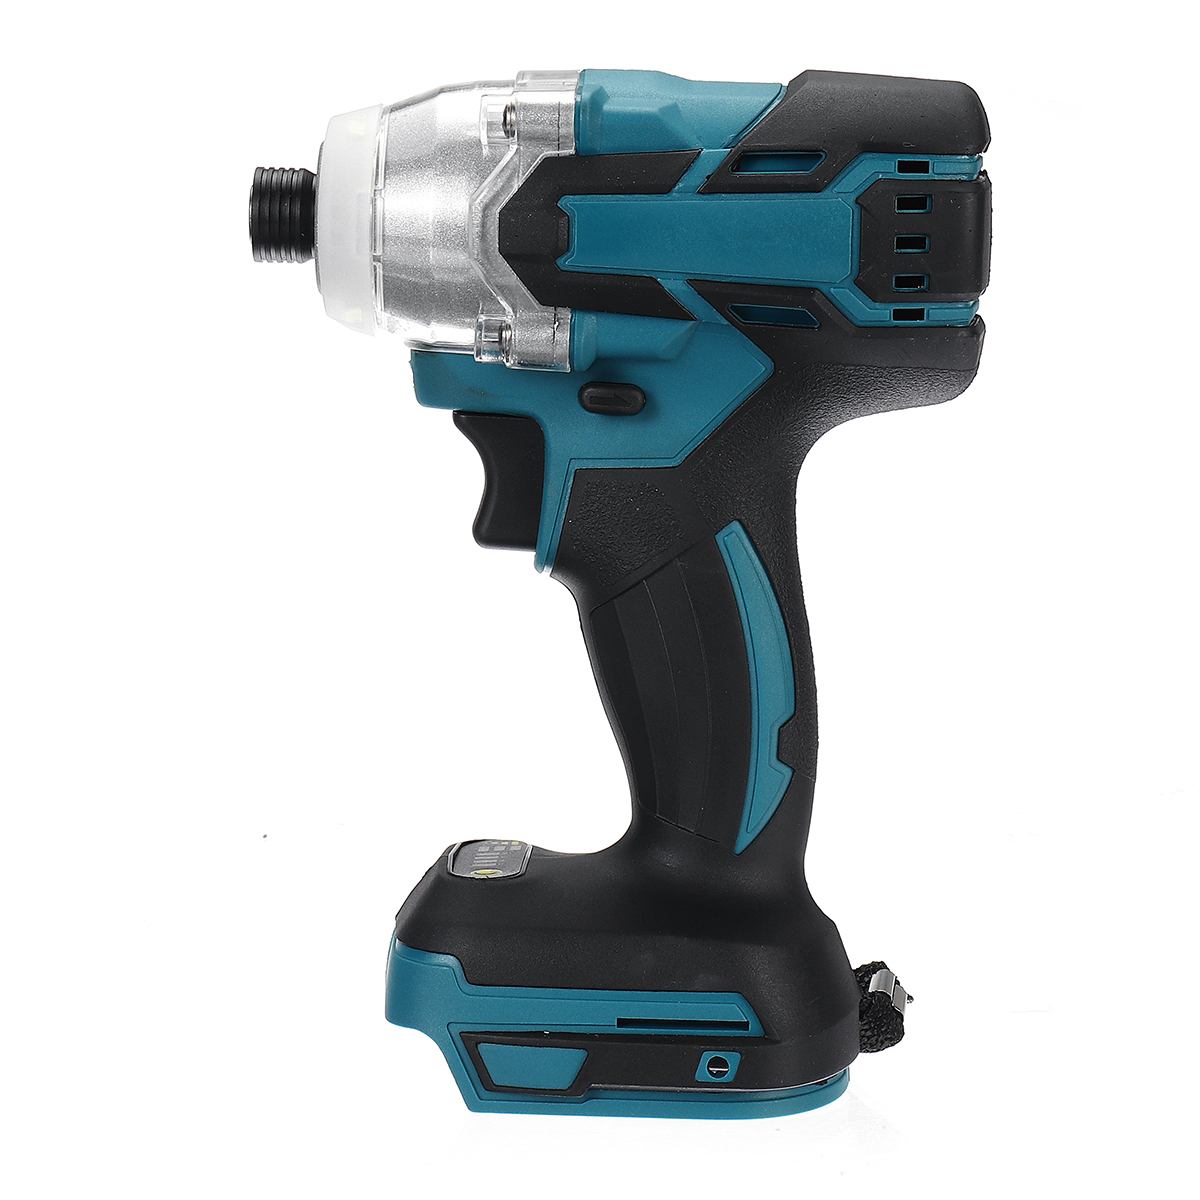 18V-520Nm-Cordless-Brushless-Impact-Electric-Screwdriver-Stepless-Speed-Rechargable-Driver-Adapted-T-1602644-7